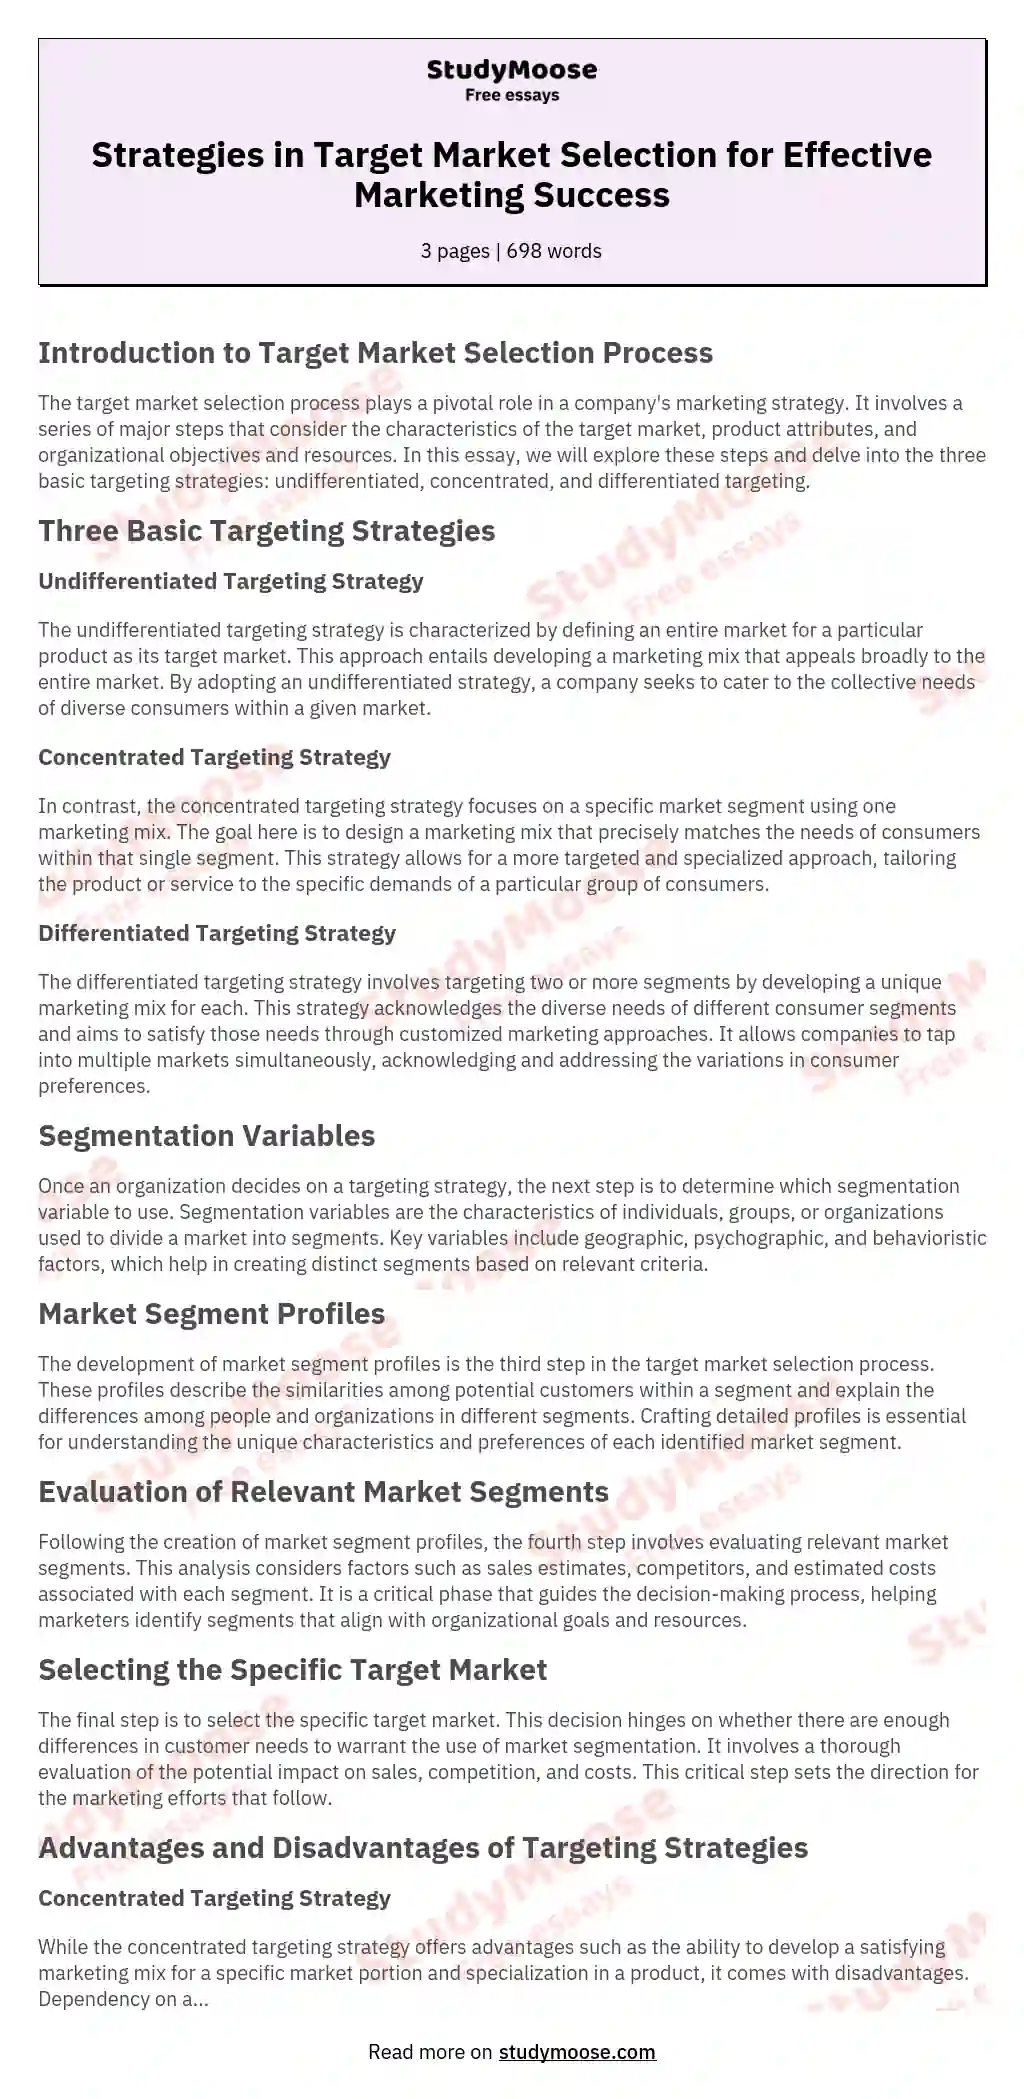 Strategies in Target Market Selection for Effective Marketing Success essay